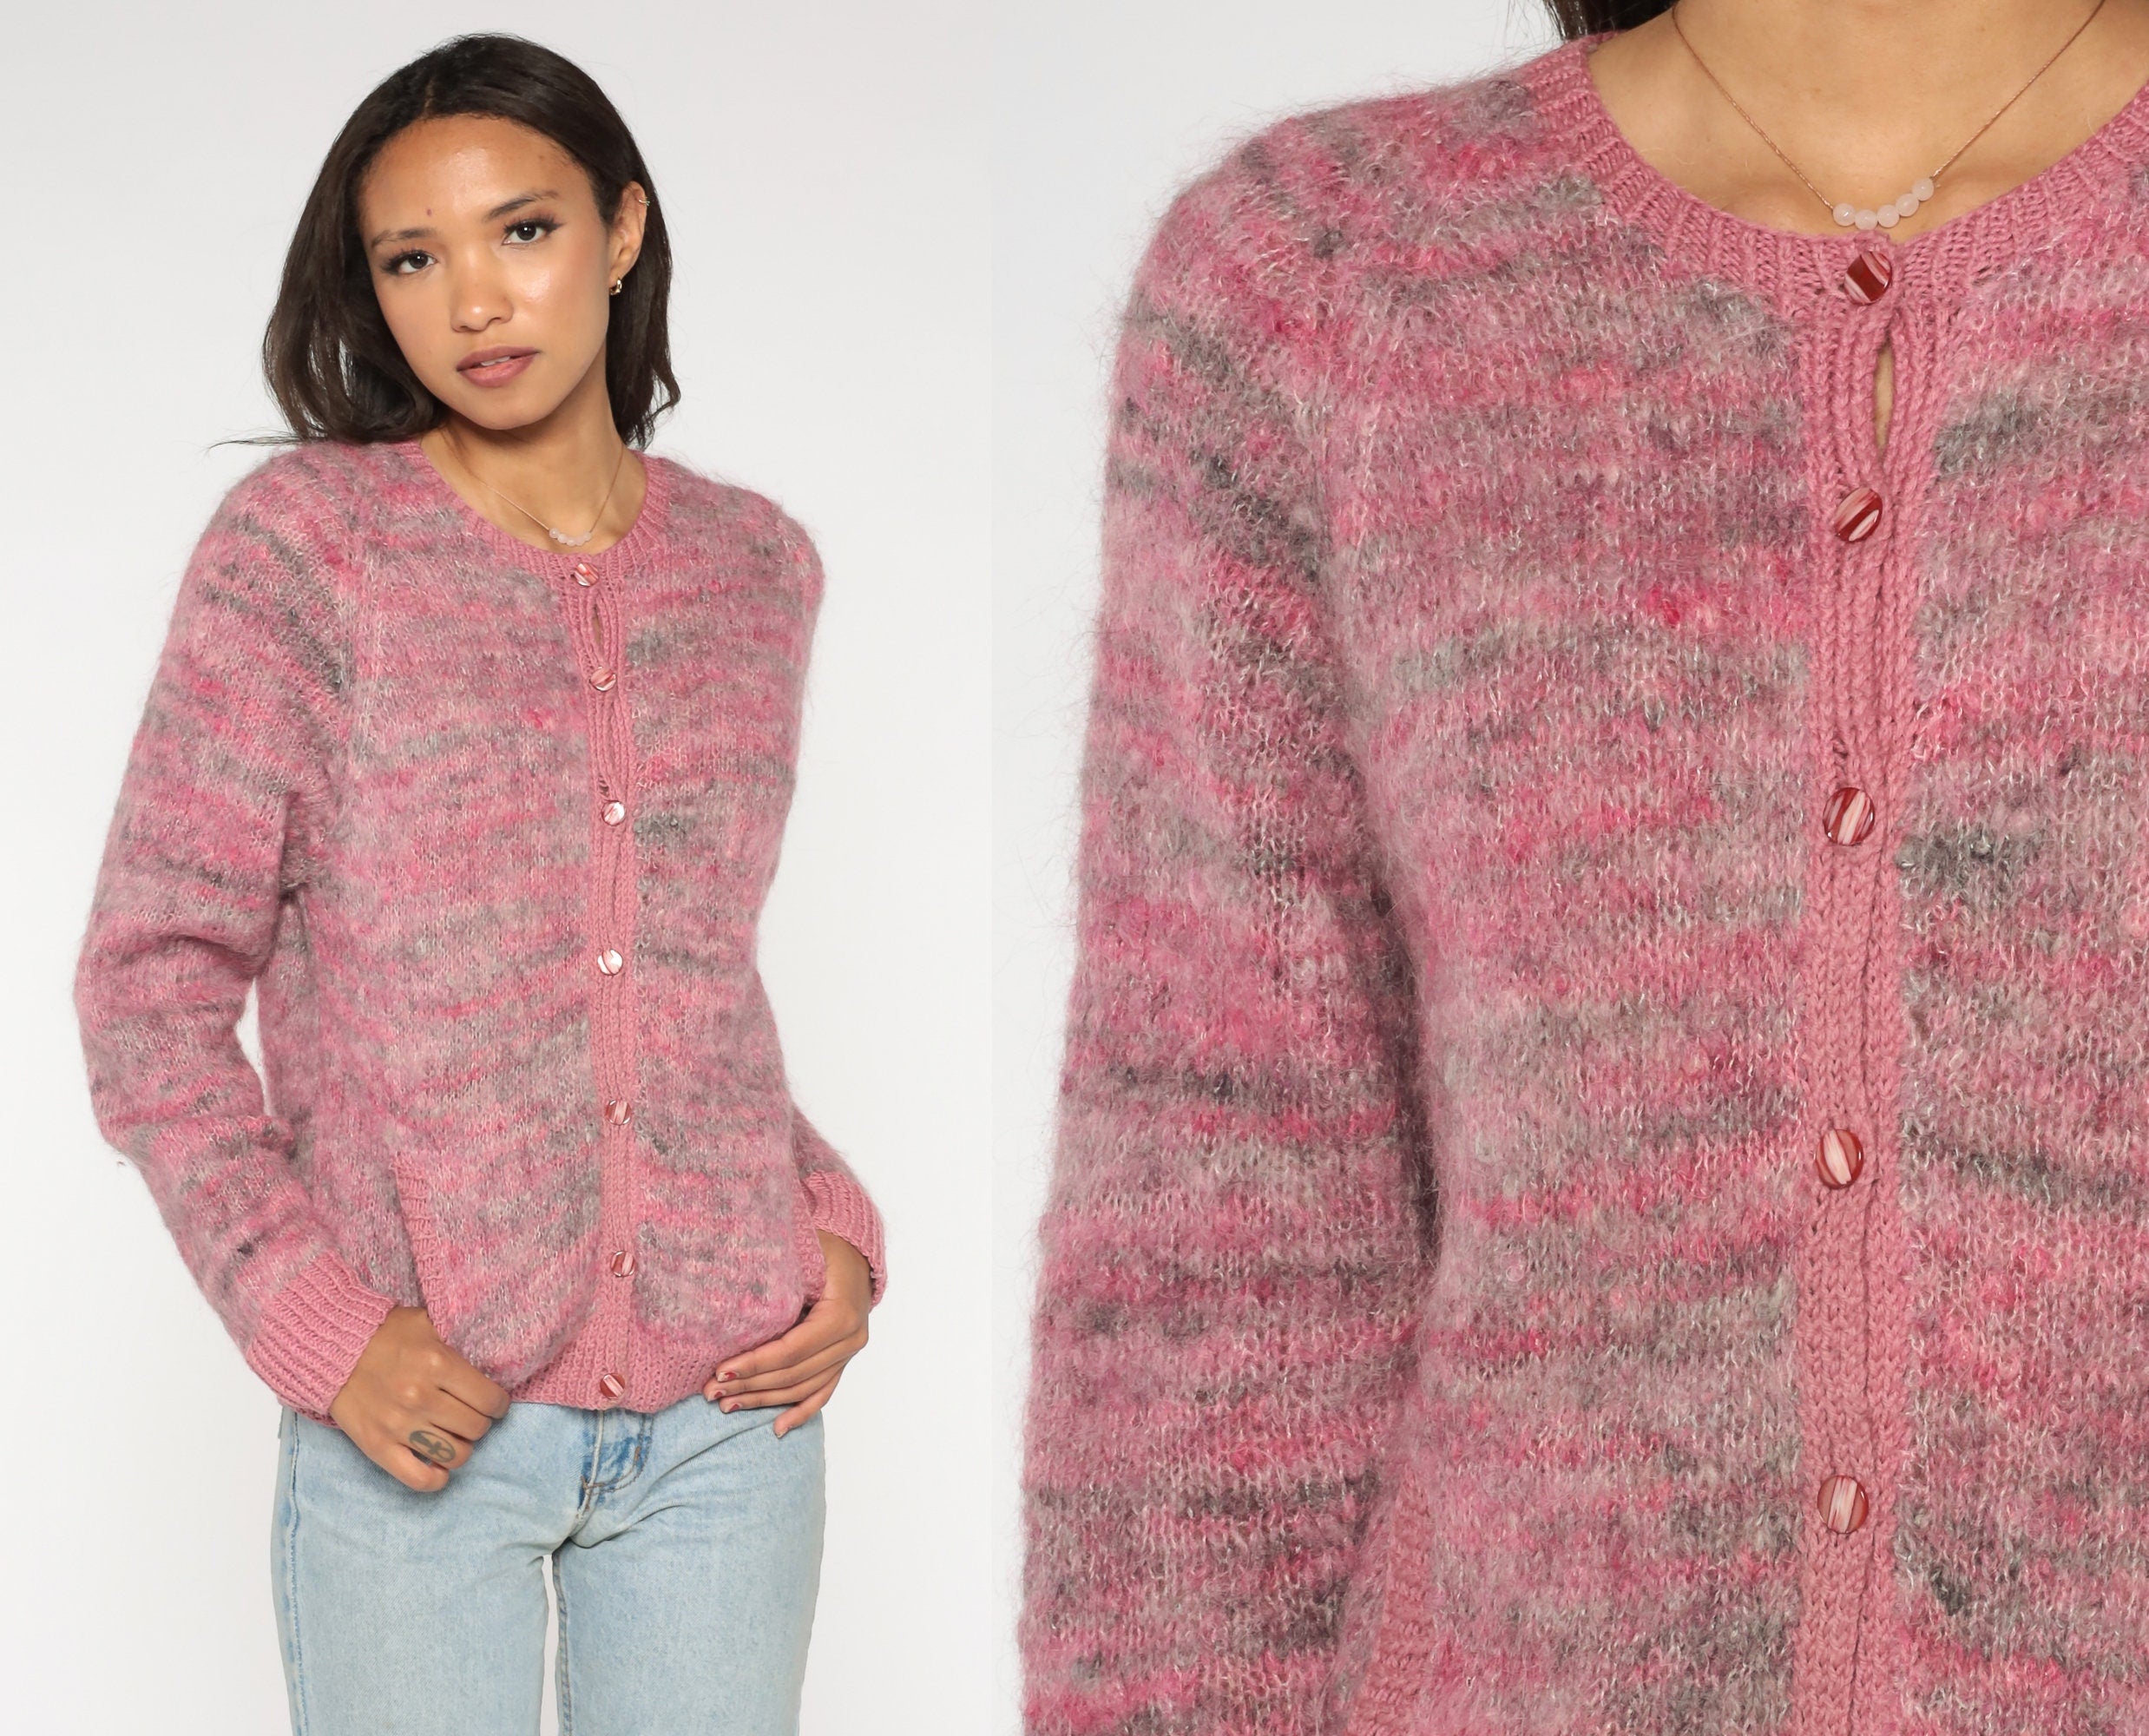 Space Dye Cardigan 80s Pink Mohair Button Up Knit Sweater Bohemian Kni